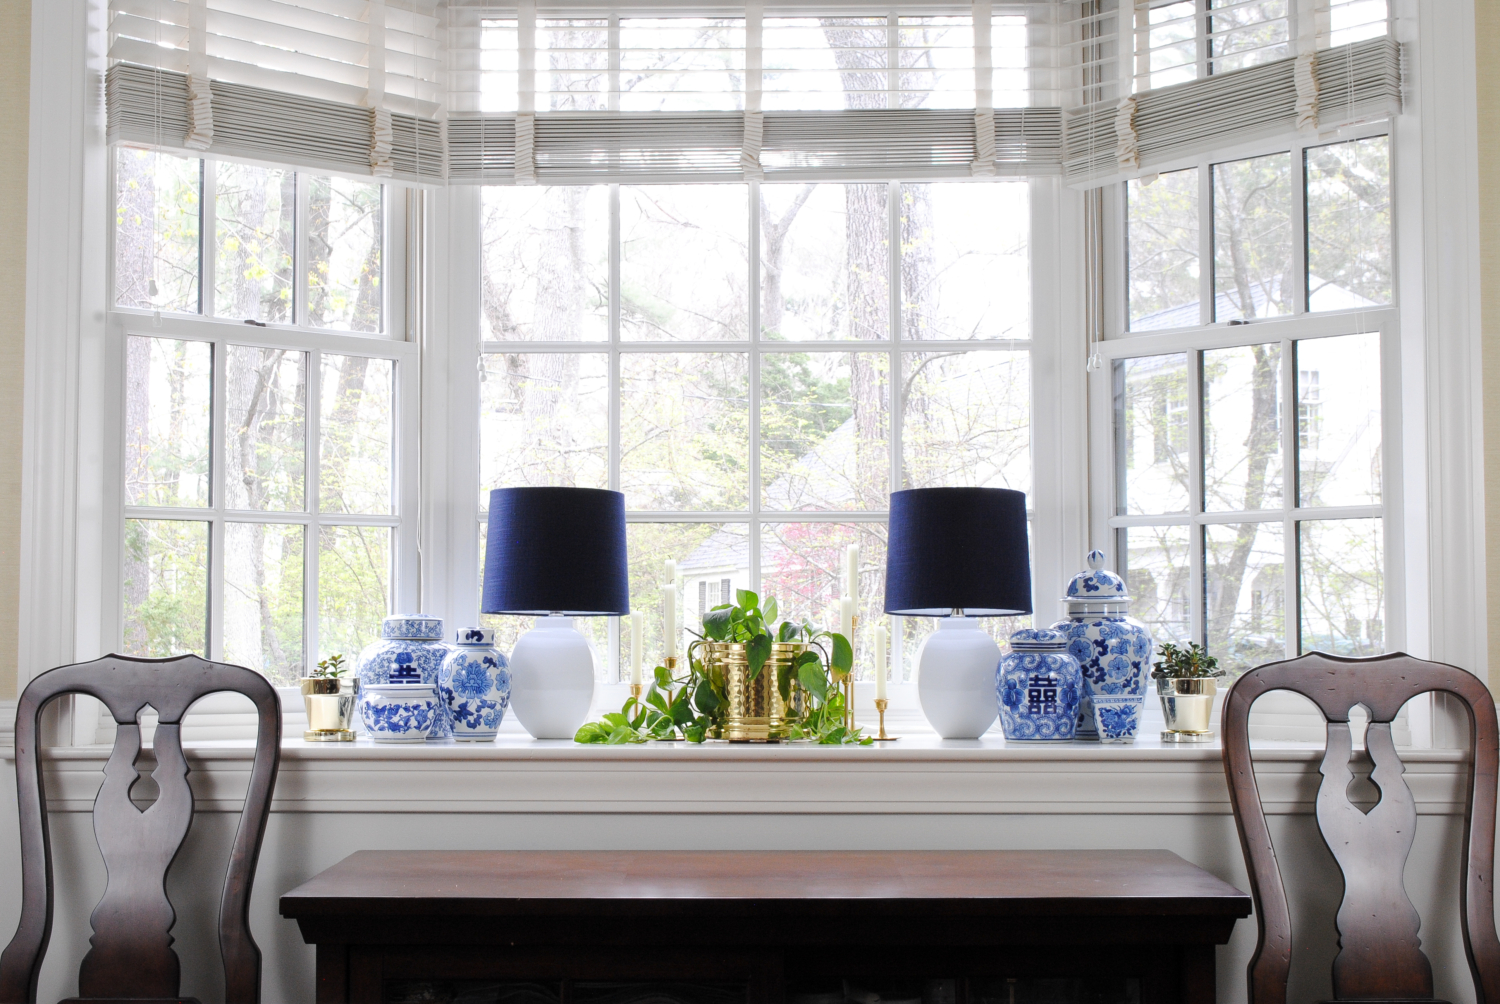 Blue and white pottery ginger jars collection, how to decorate a bay window, and how you can get this look on a budget!